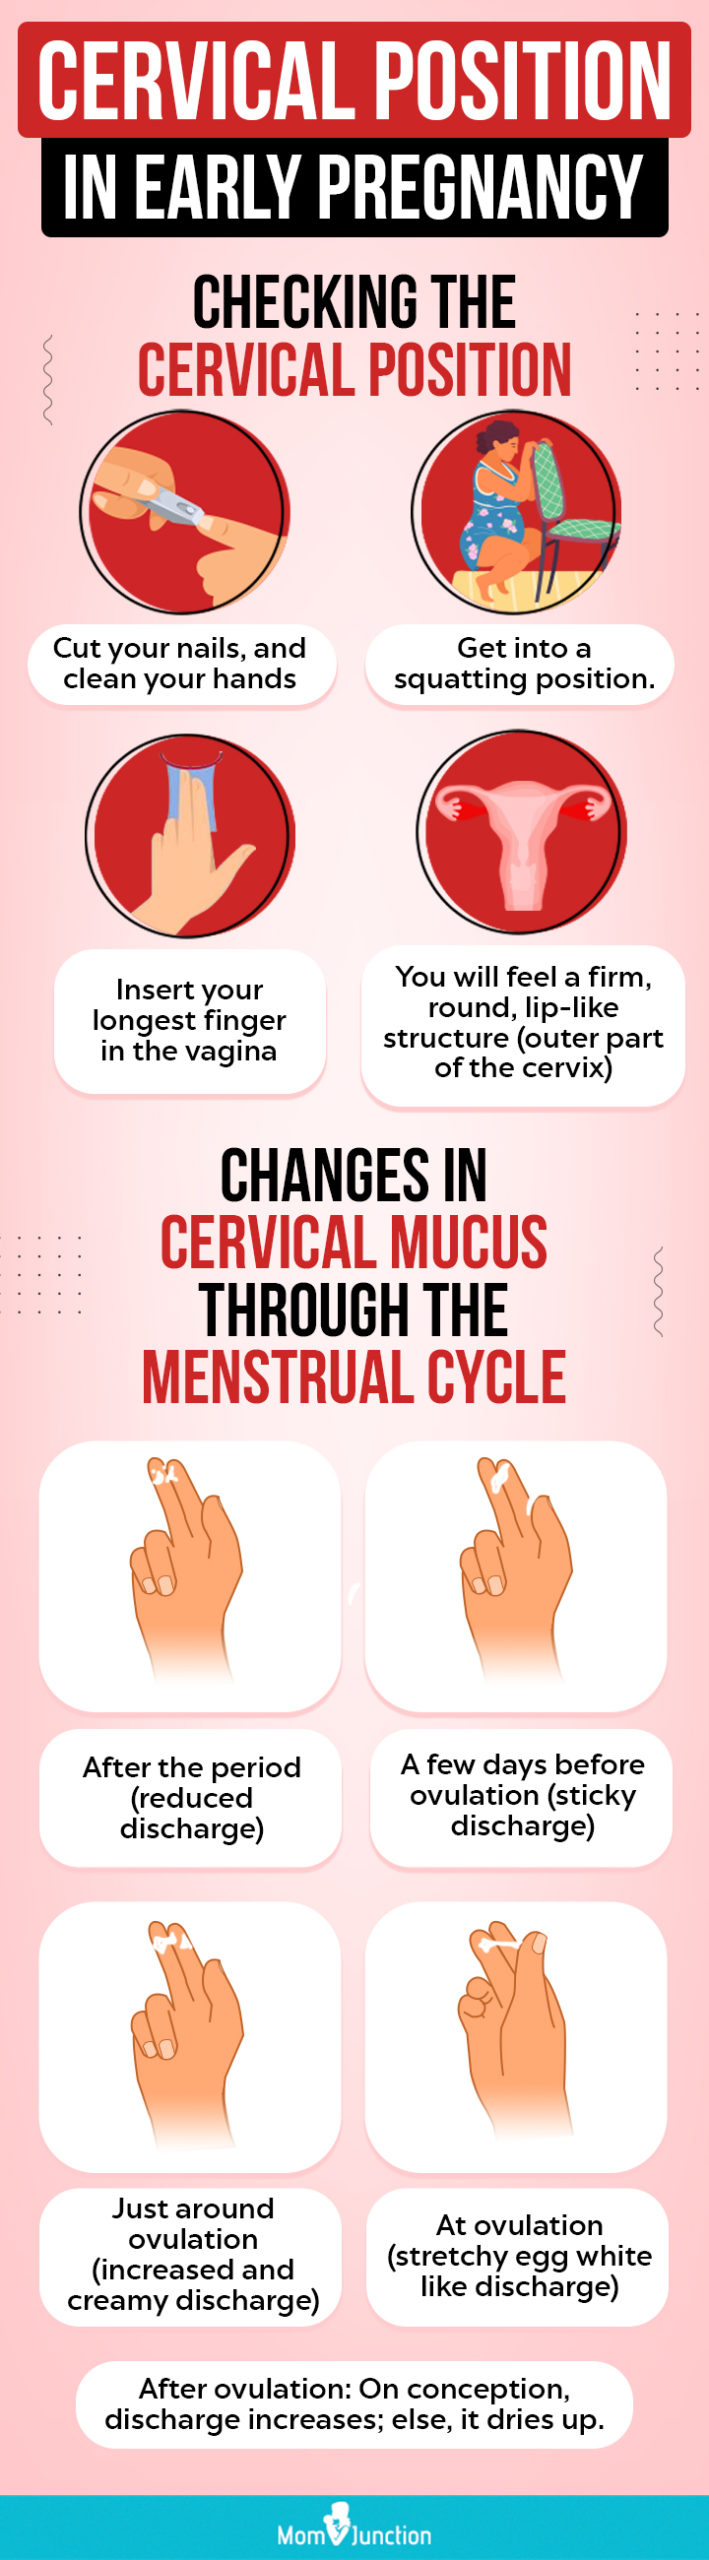 Cervical Mucus and Early Pregancy